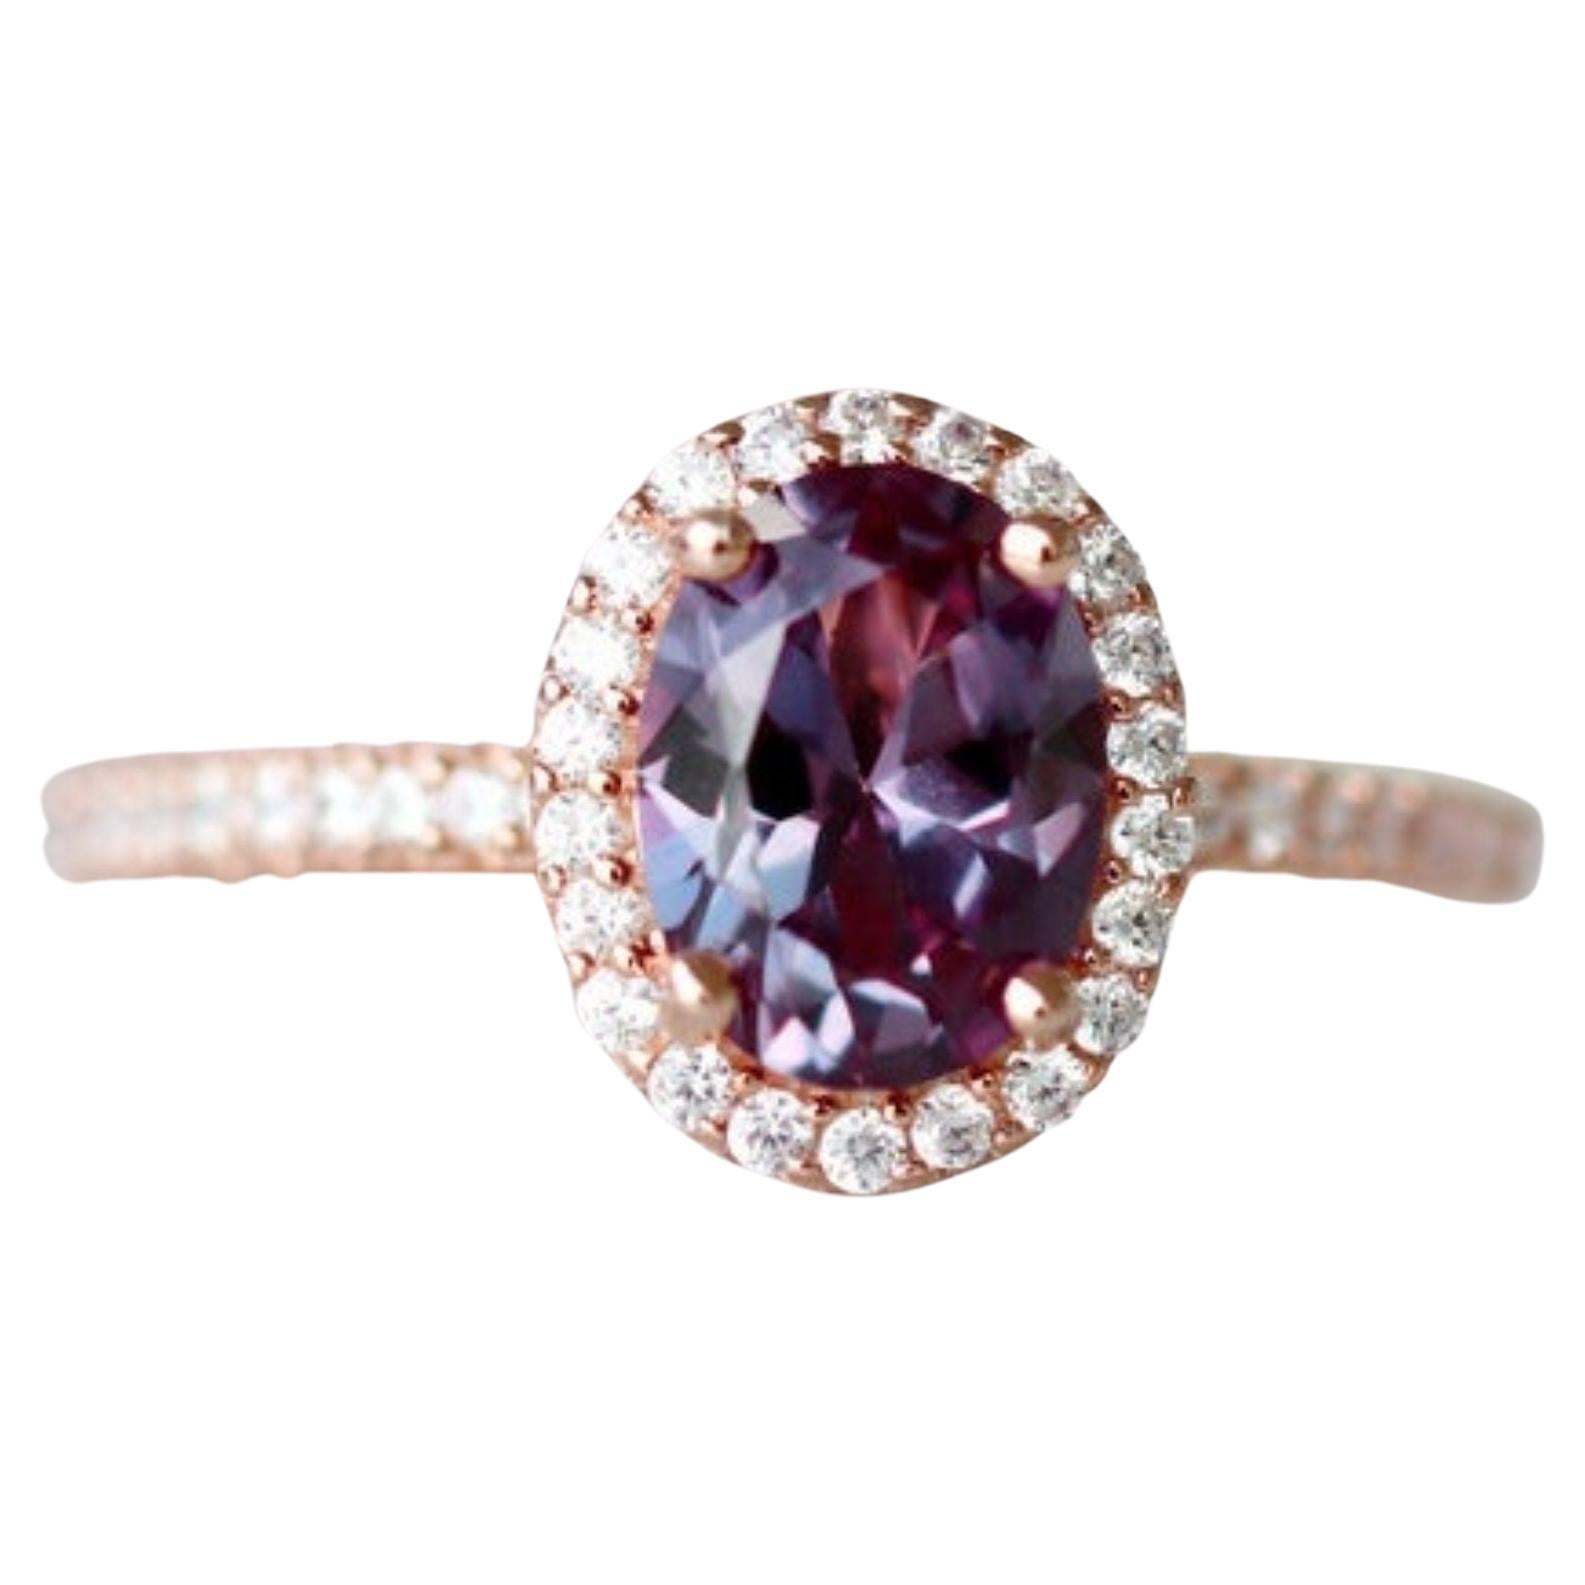 For Sale:  Oval Cut Alexandrite Bridal Wedding Ring, Art Deco Rose Gold Engagement Ring